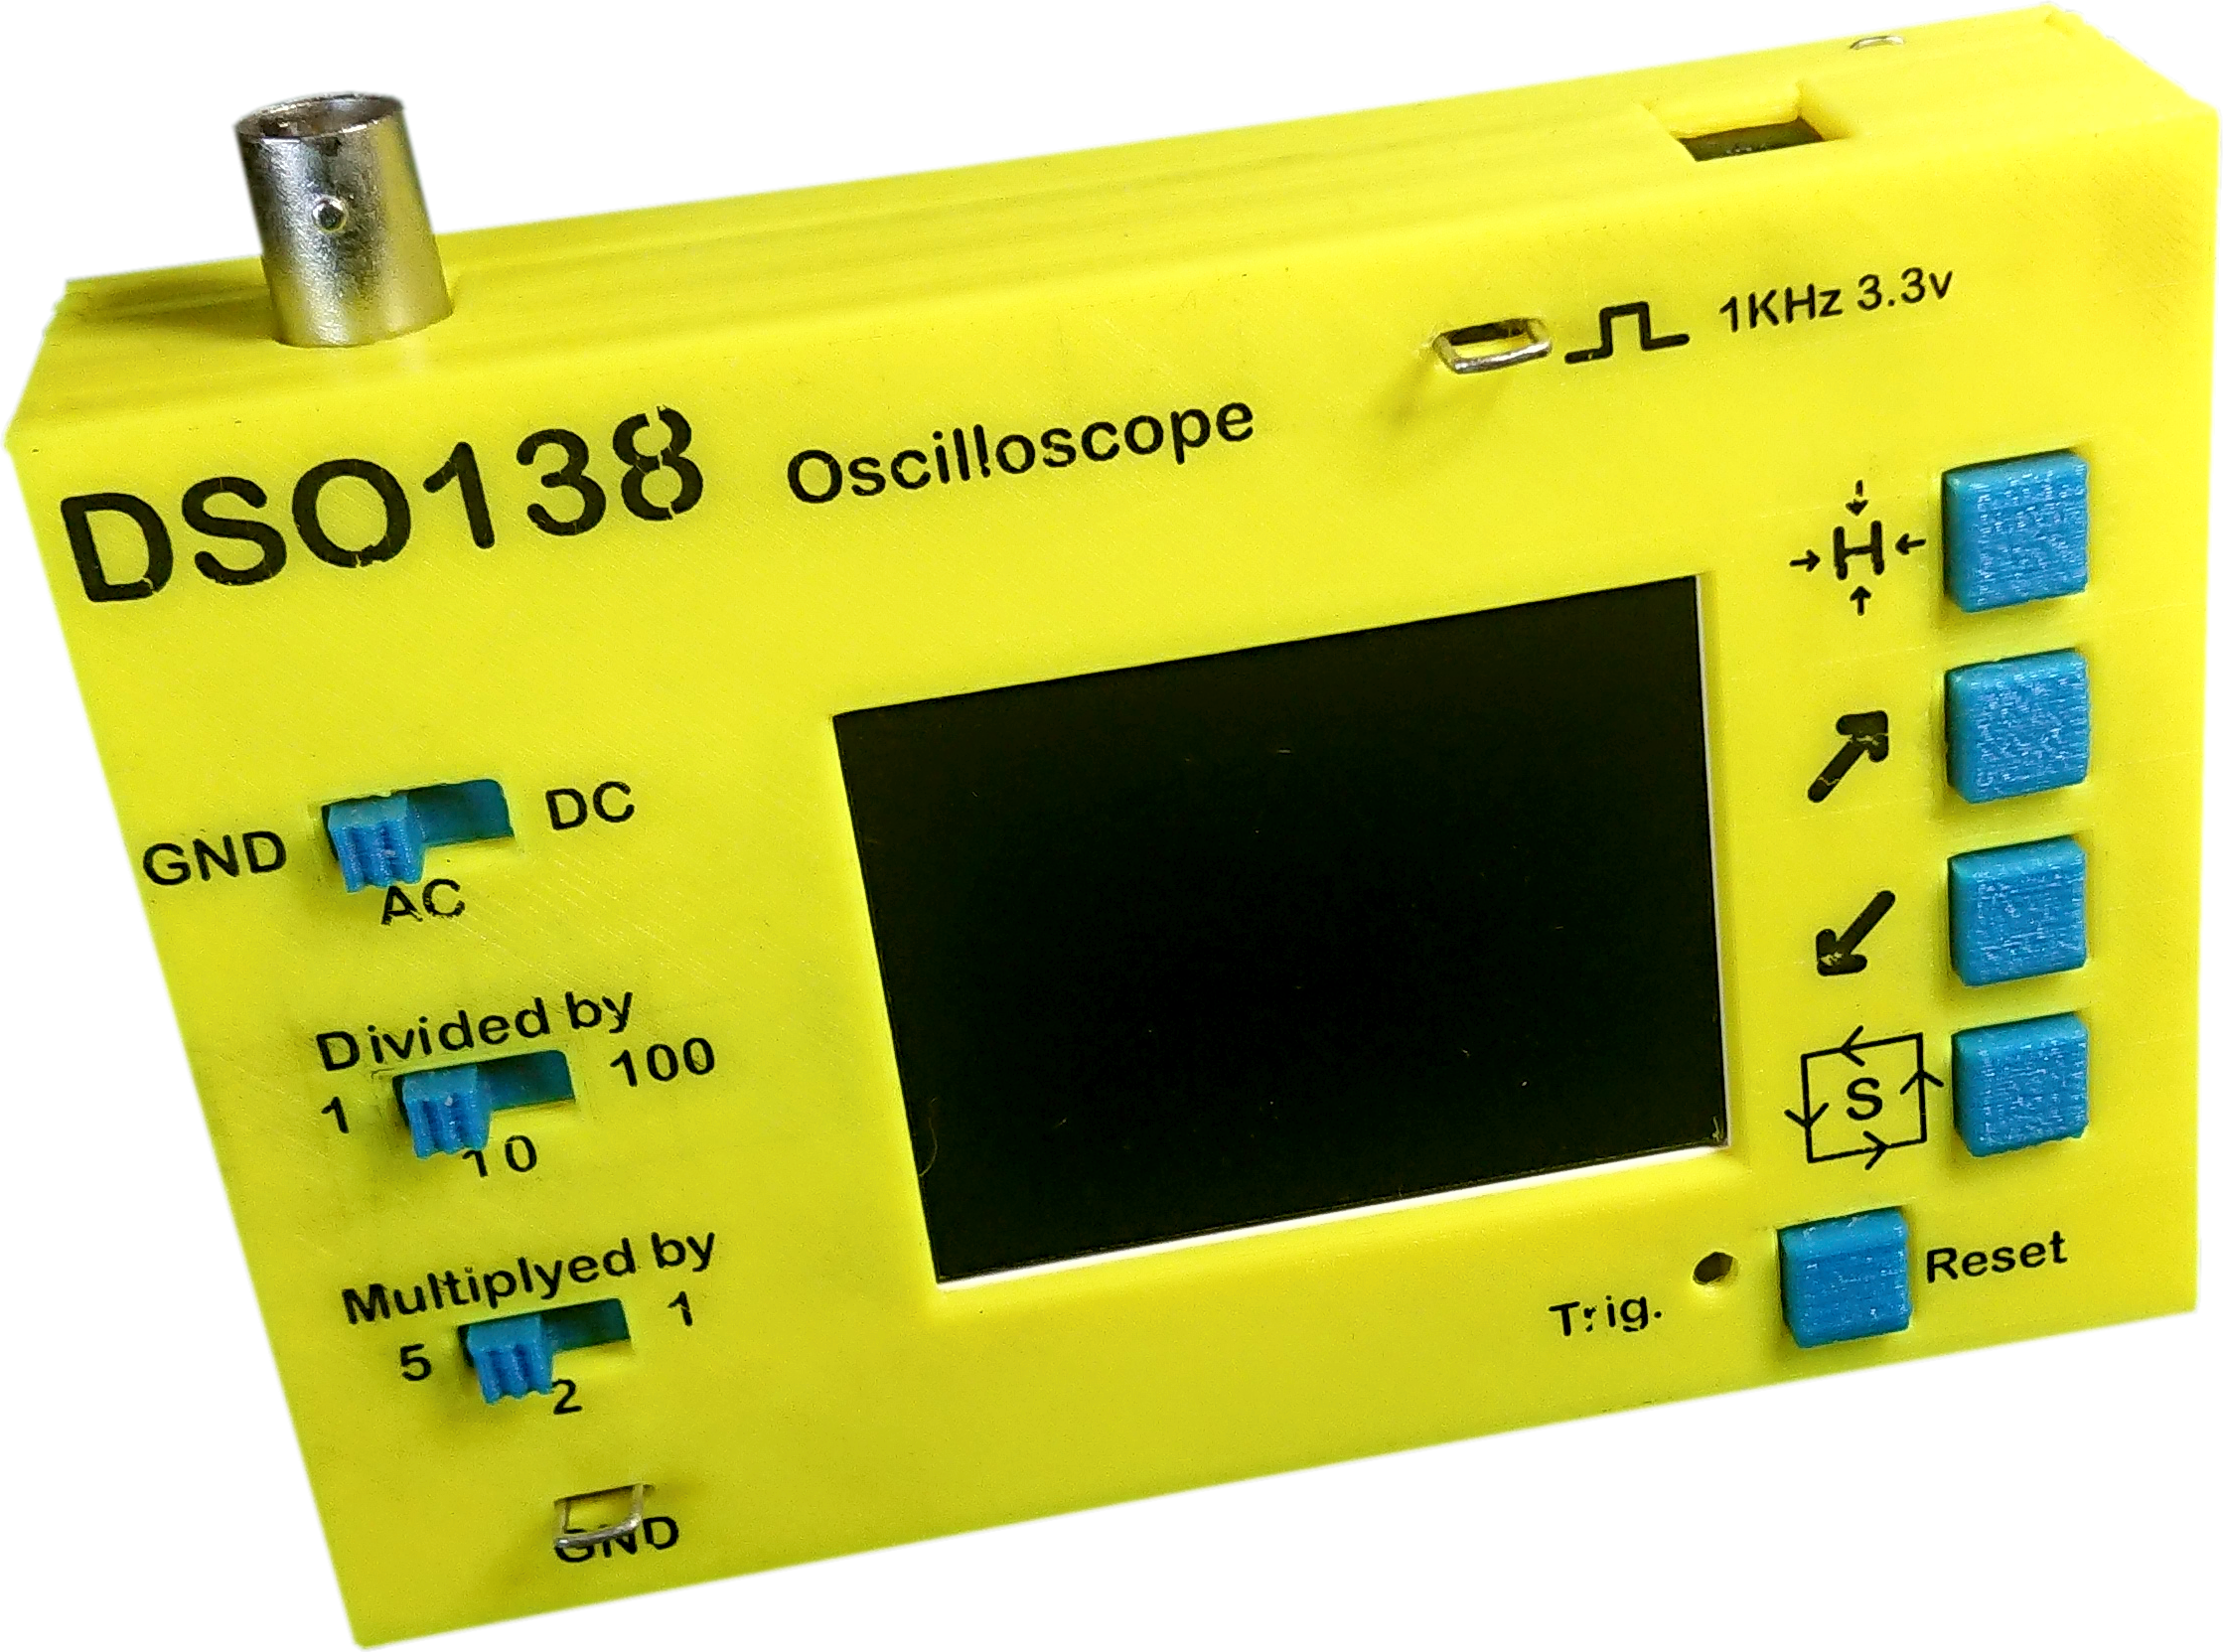 DSO138_Oscilloscope.png